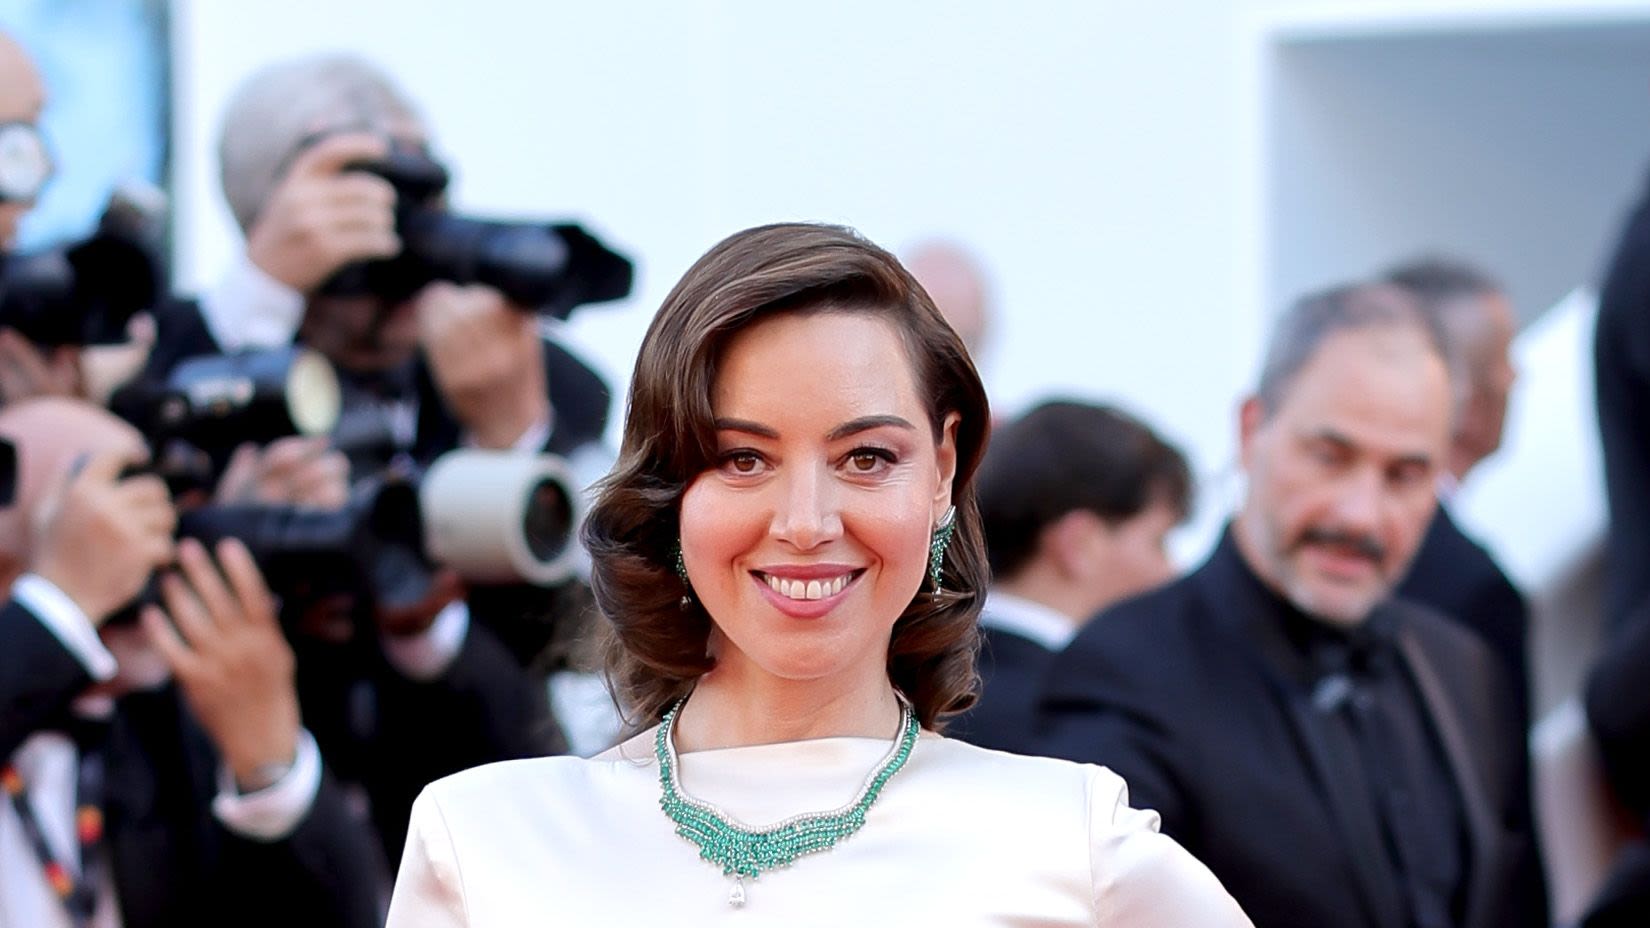 Aubrey Plaza’s Silk Eggshell Gown Has the Most Sophisticated Drop Waist